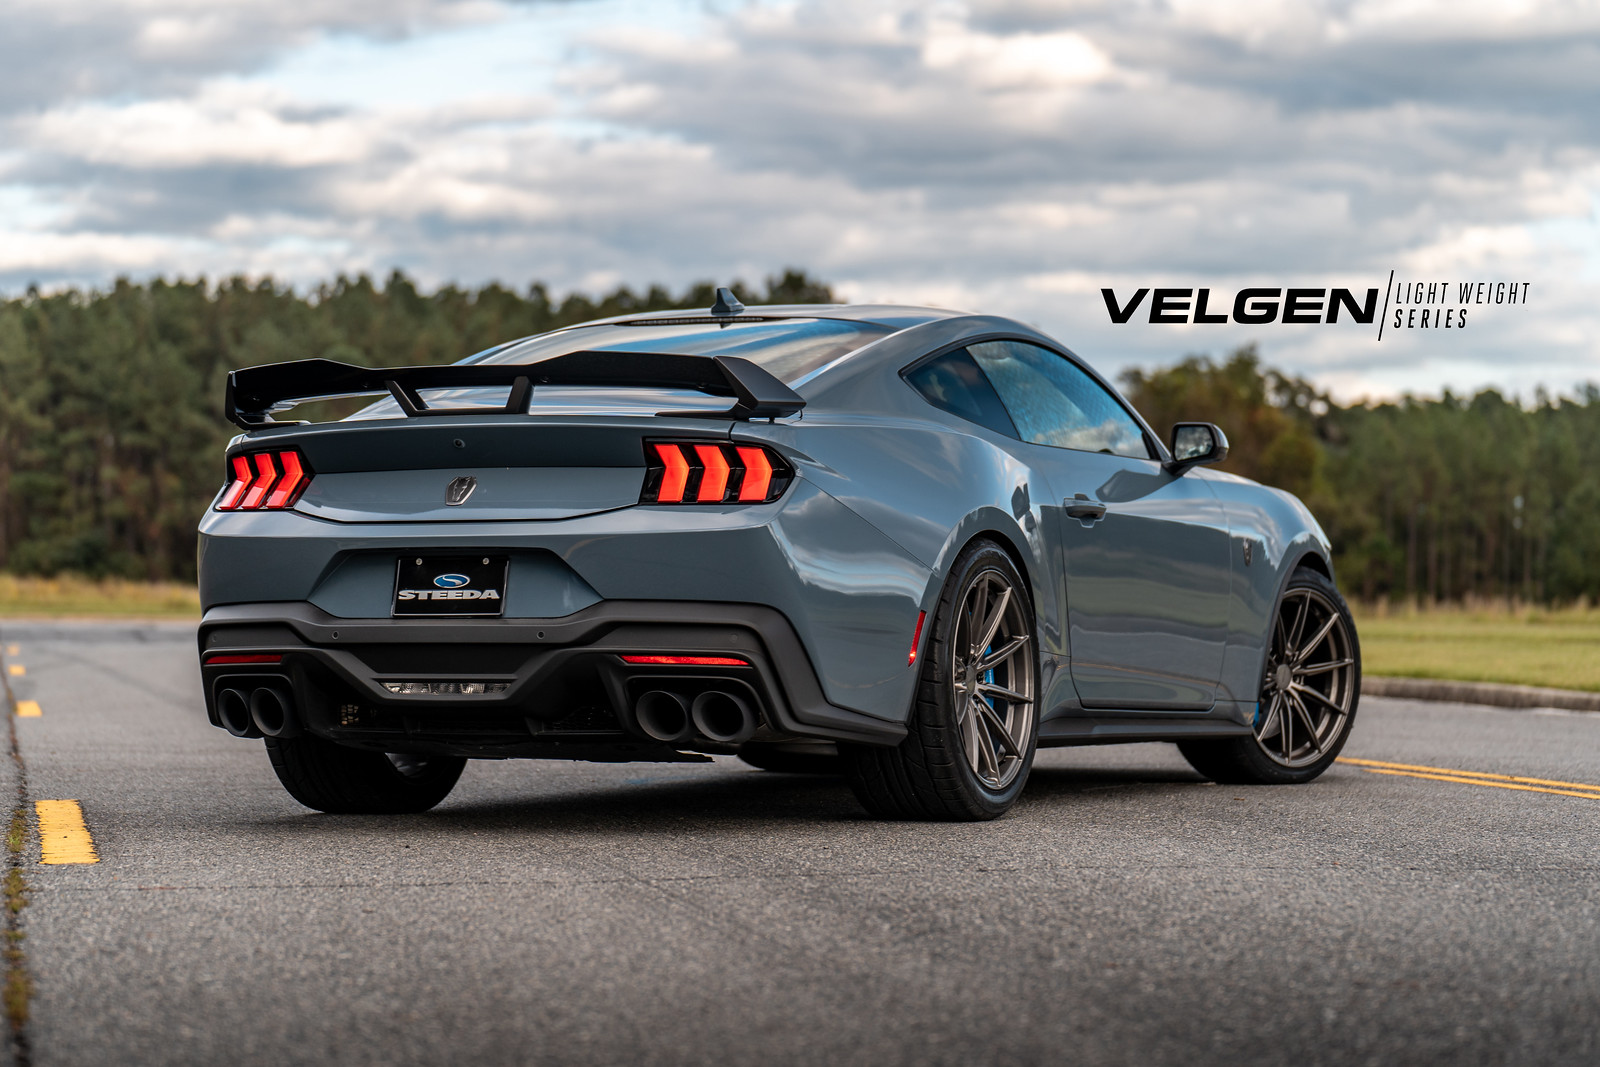 S650 Mustang Warning about HRE wheels and how they fit Steeda X Velgen Velgen Wheels